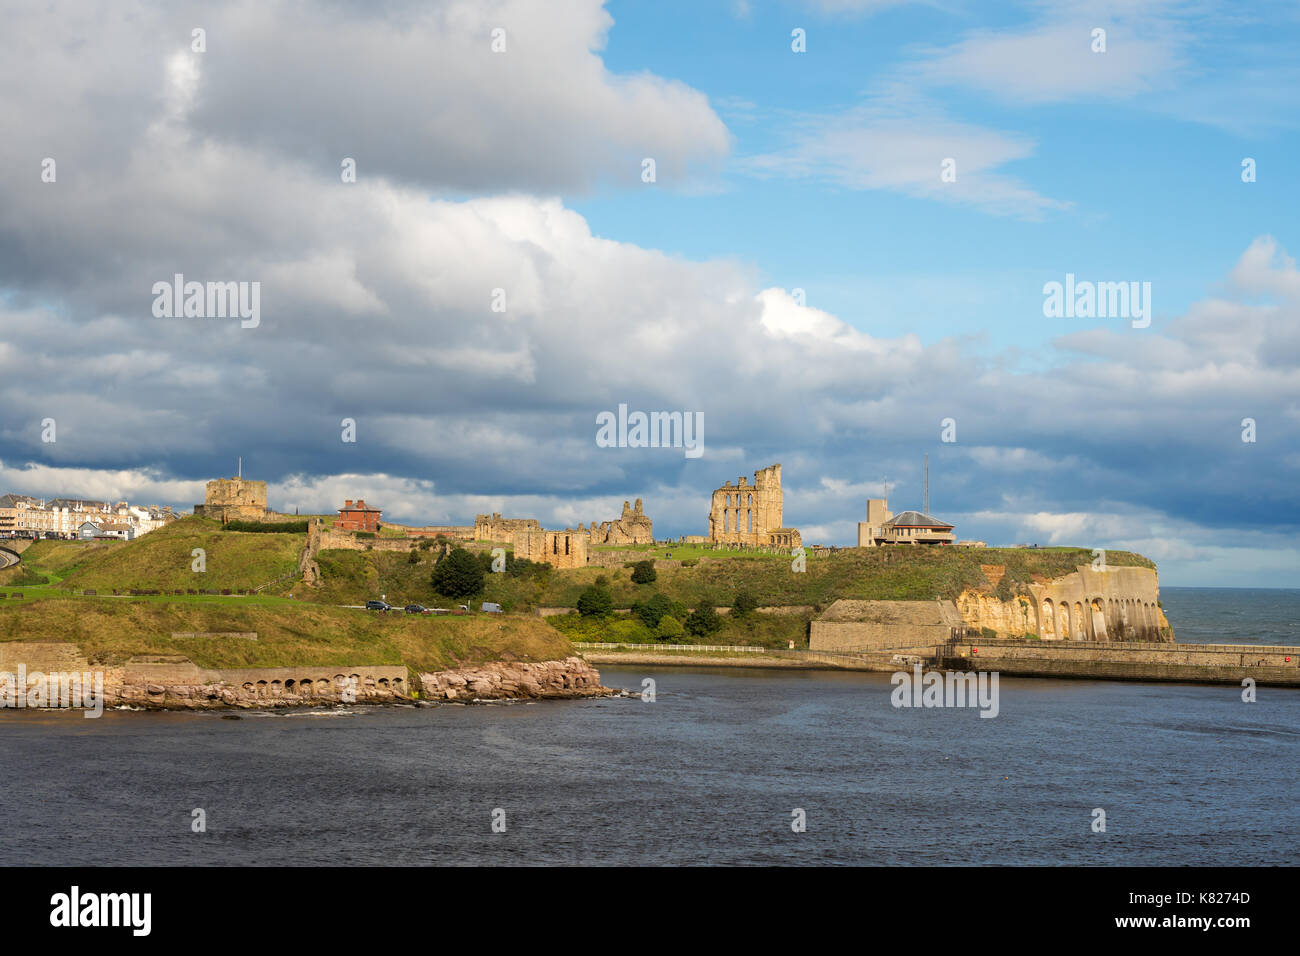 Tynemouth priory and castle seen from the Tyne estuary, north east England, UK Stock Photo